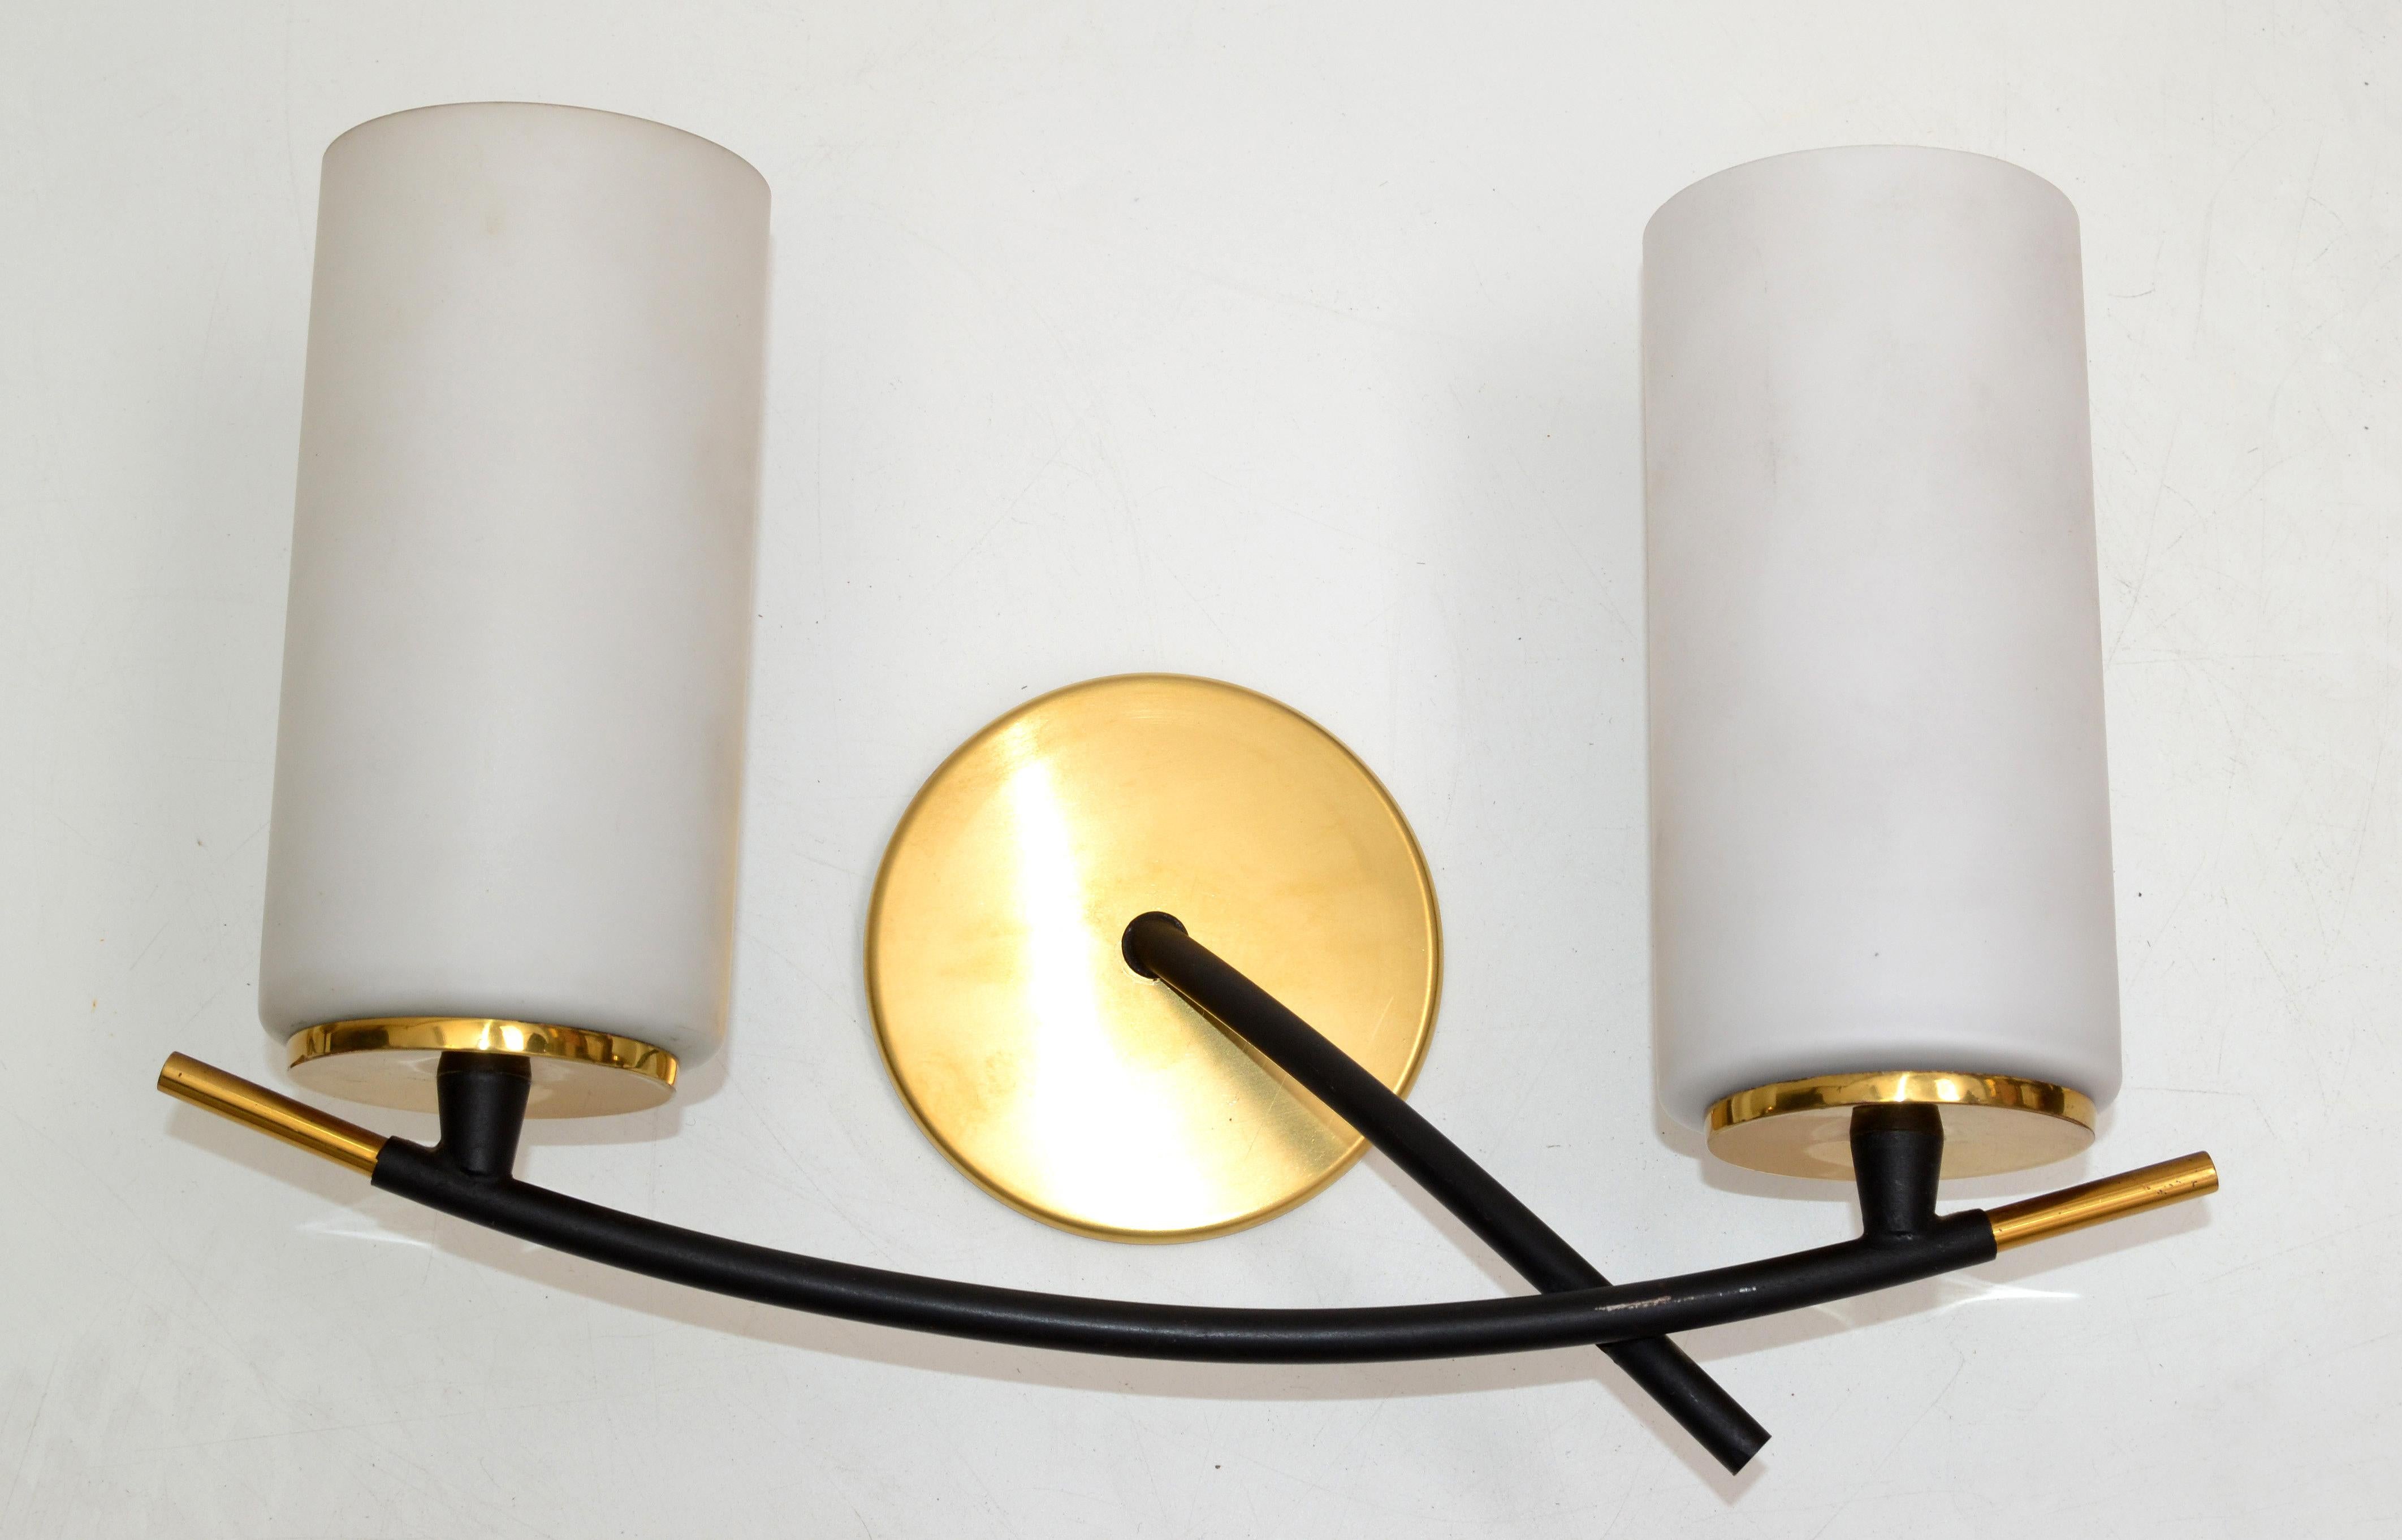 Maison Arlus 2 Light Sconce Brass Steel & Cylinder Opaline Shade Art Deco, Pair In Good Condition For Sale In Miami, FL